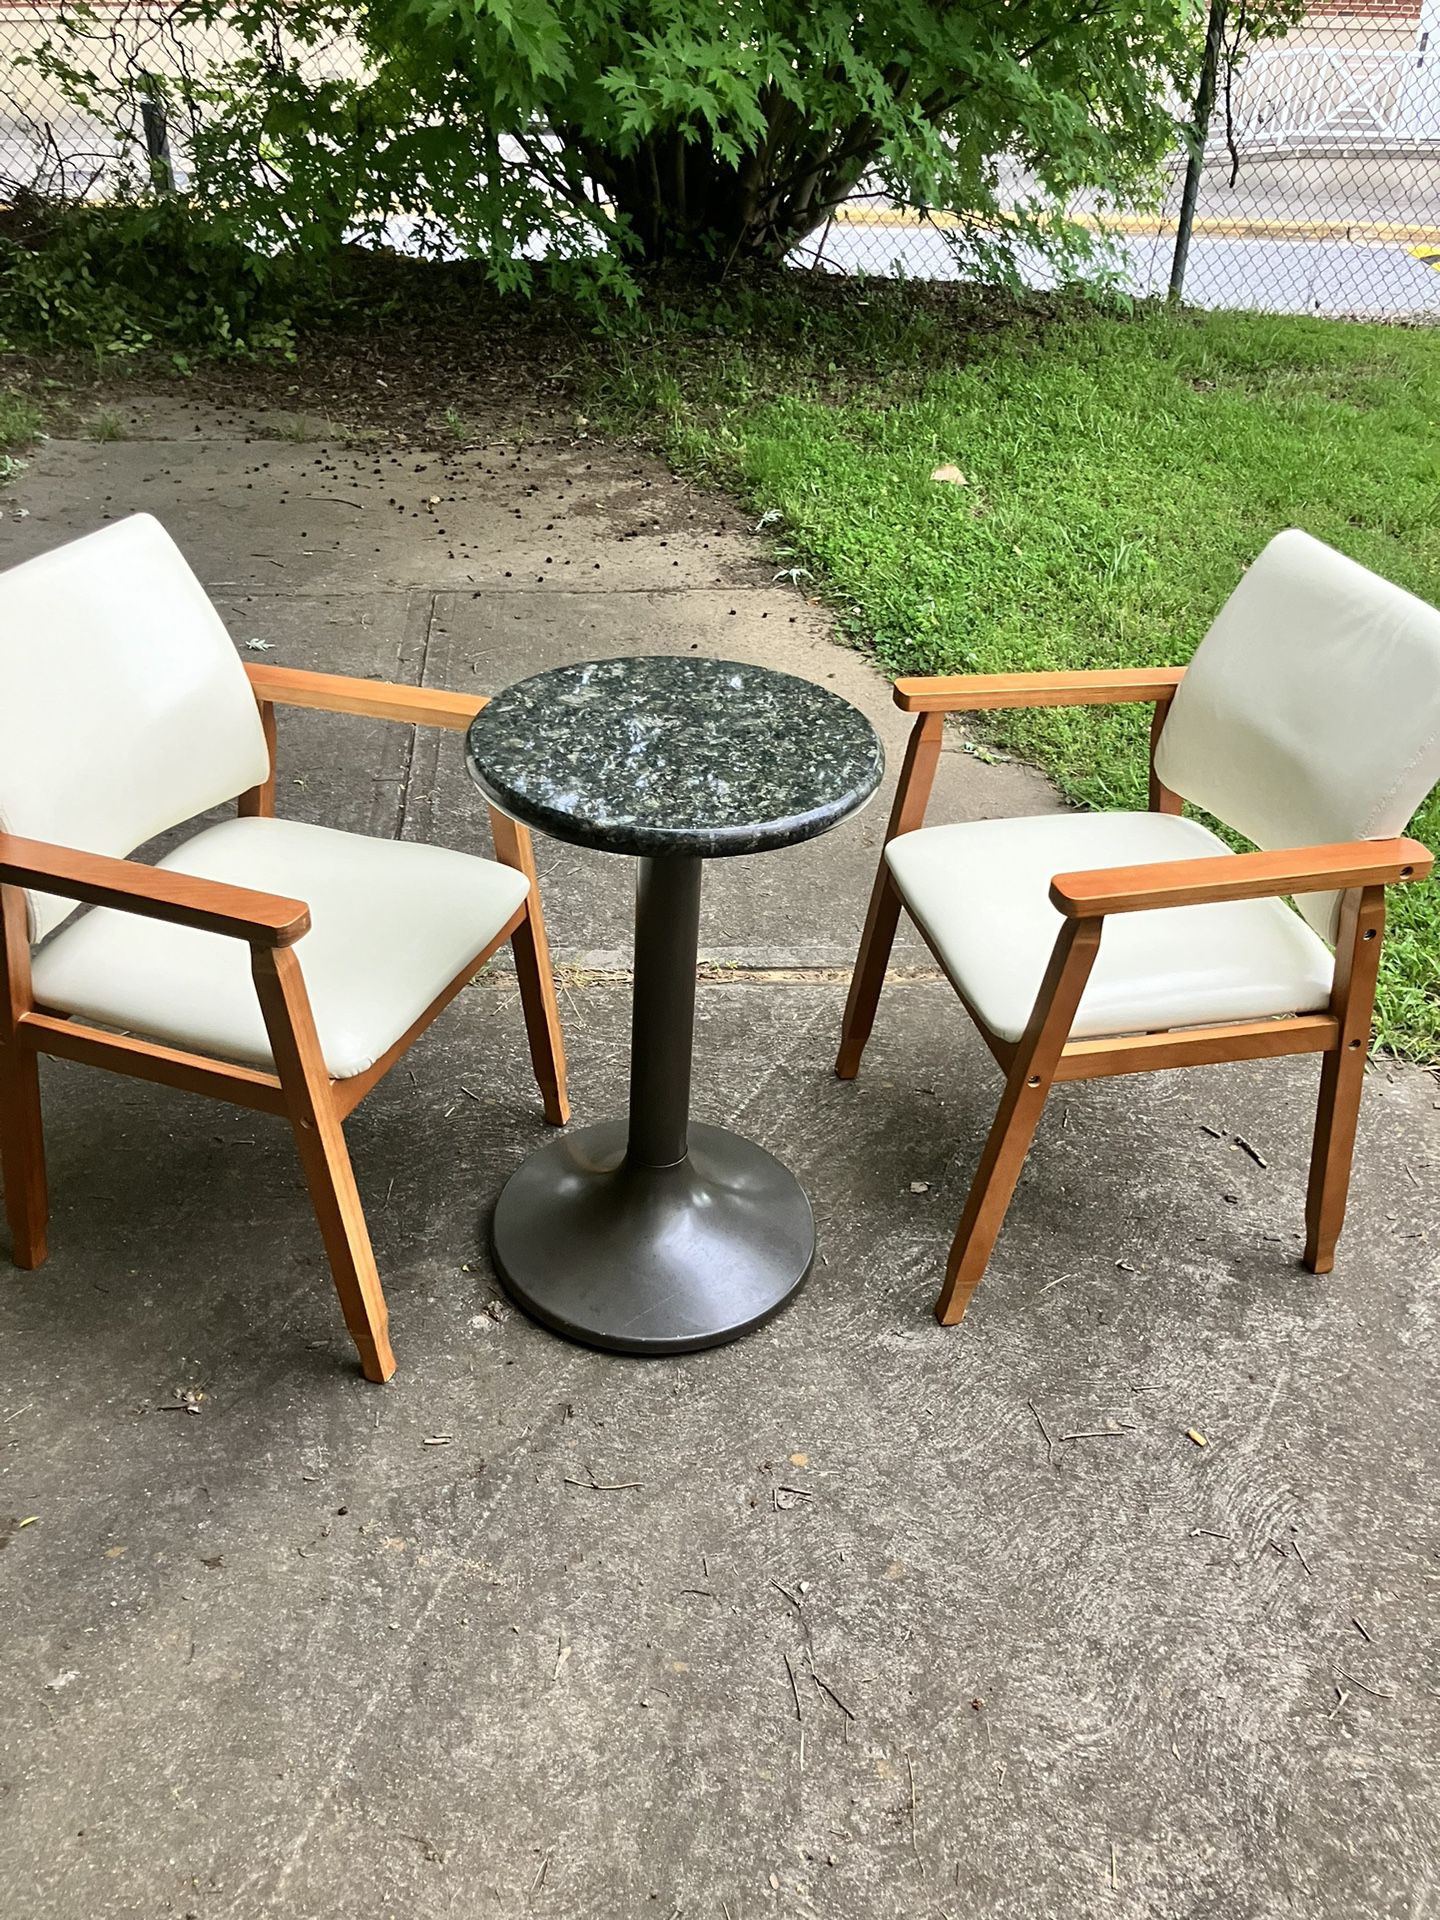 Two Chairs And Granite Pedestal Table